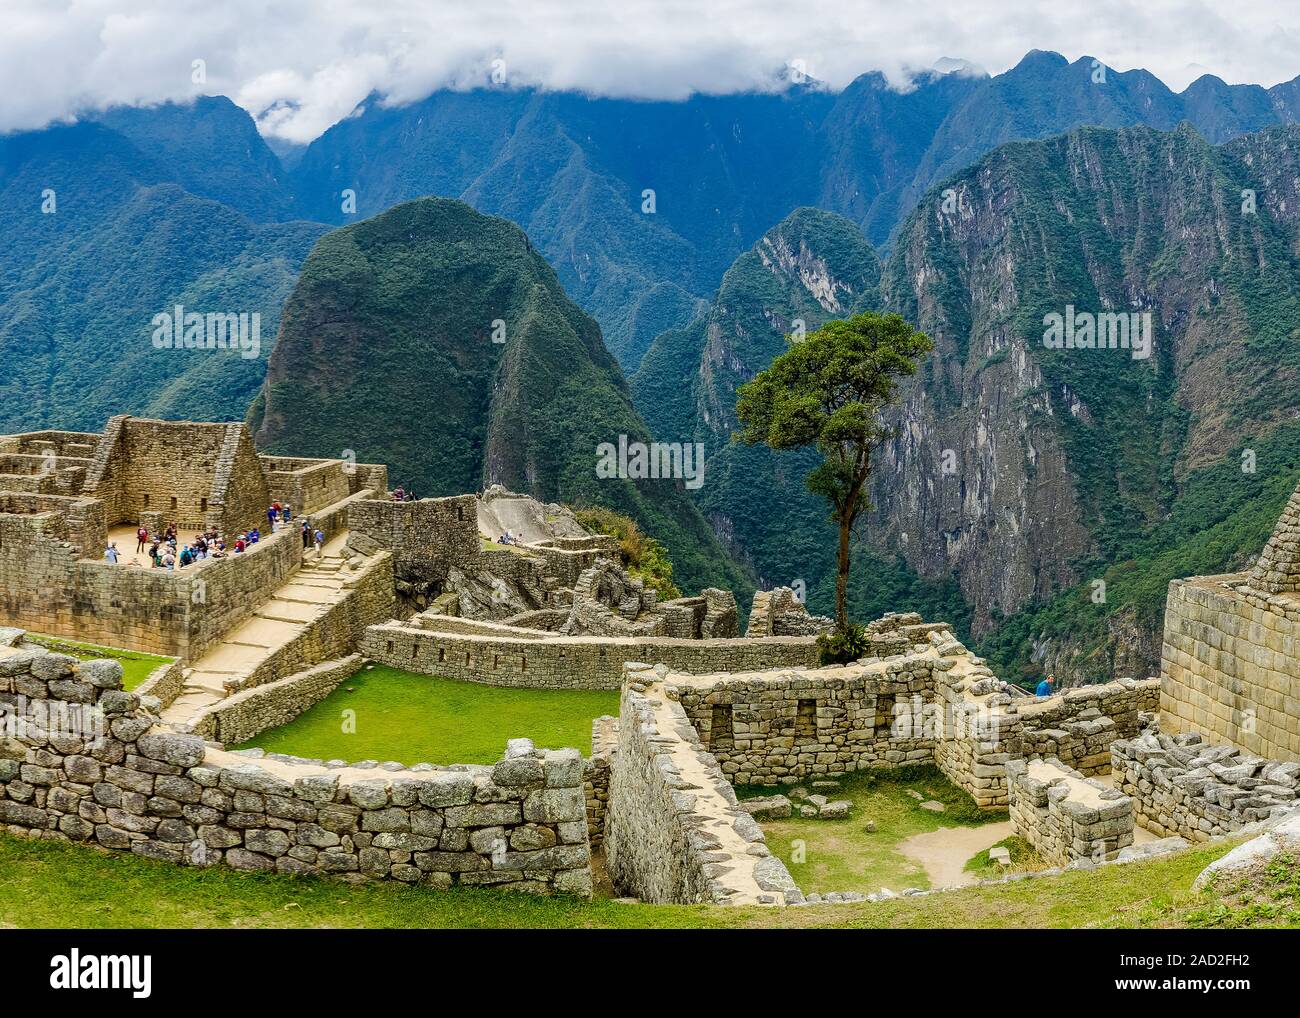 Machu Picchu is an Incan citadel set high in the Andes Mountains in Peru, above the Urubamba River valley. Built in the 15th century and later abandon Stock Photo